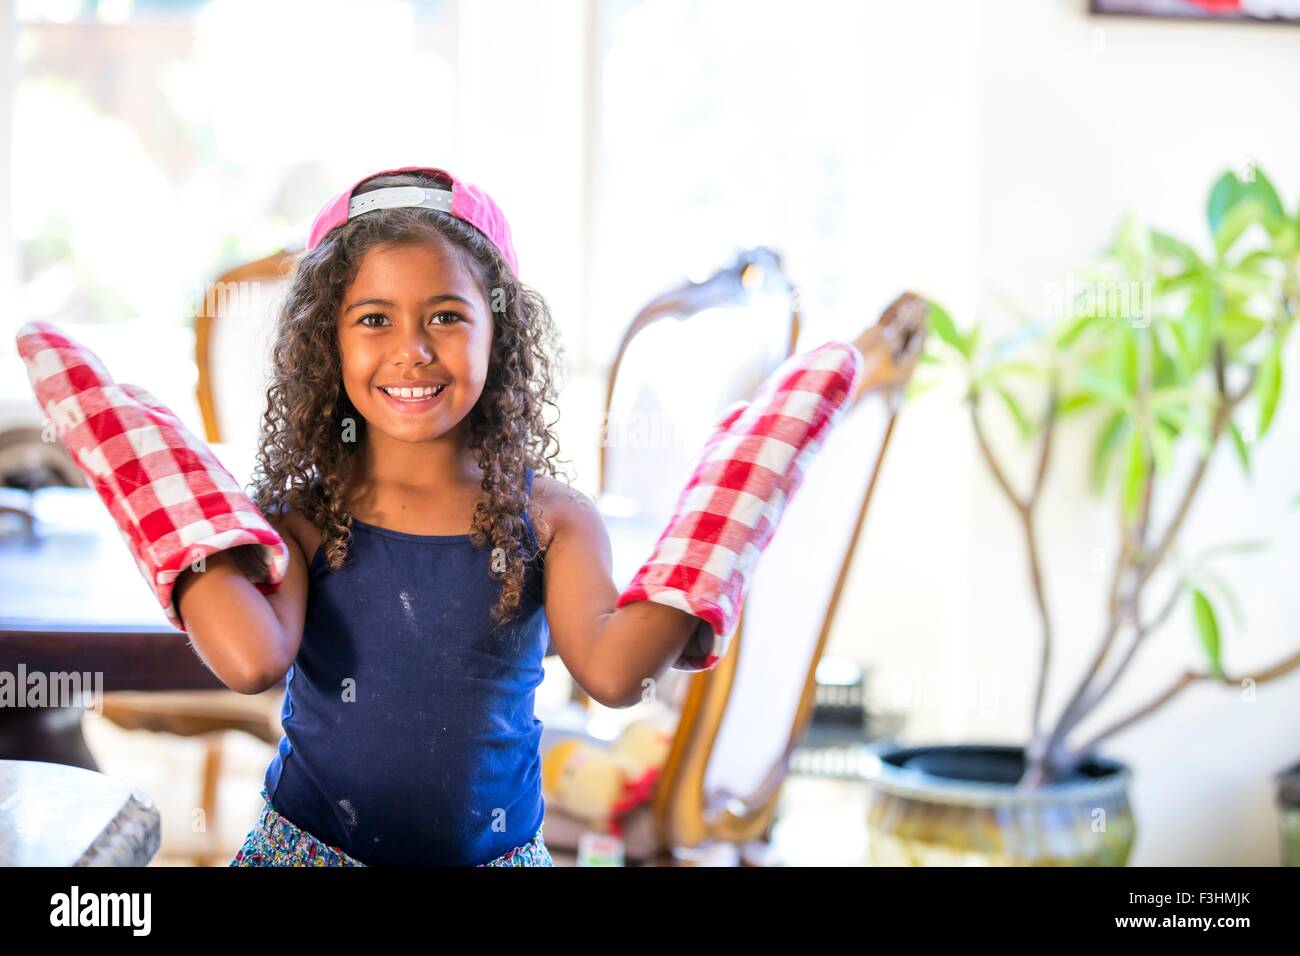 Girl wearing oven gloves hands raised looking at camera smiling Stock Photo